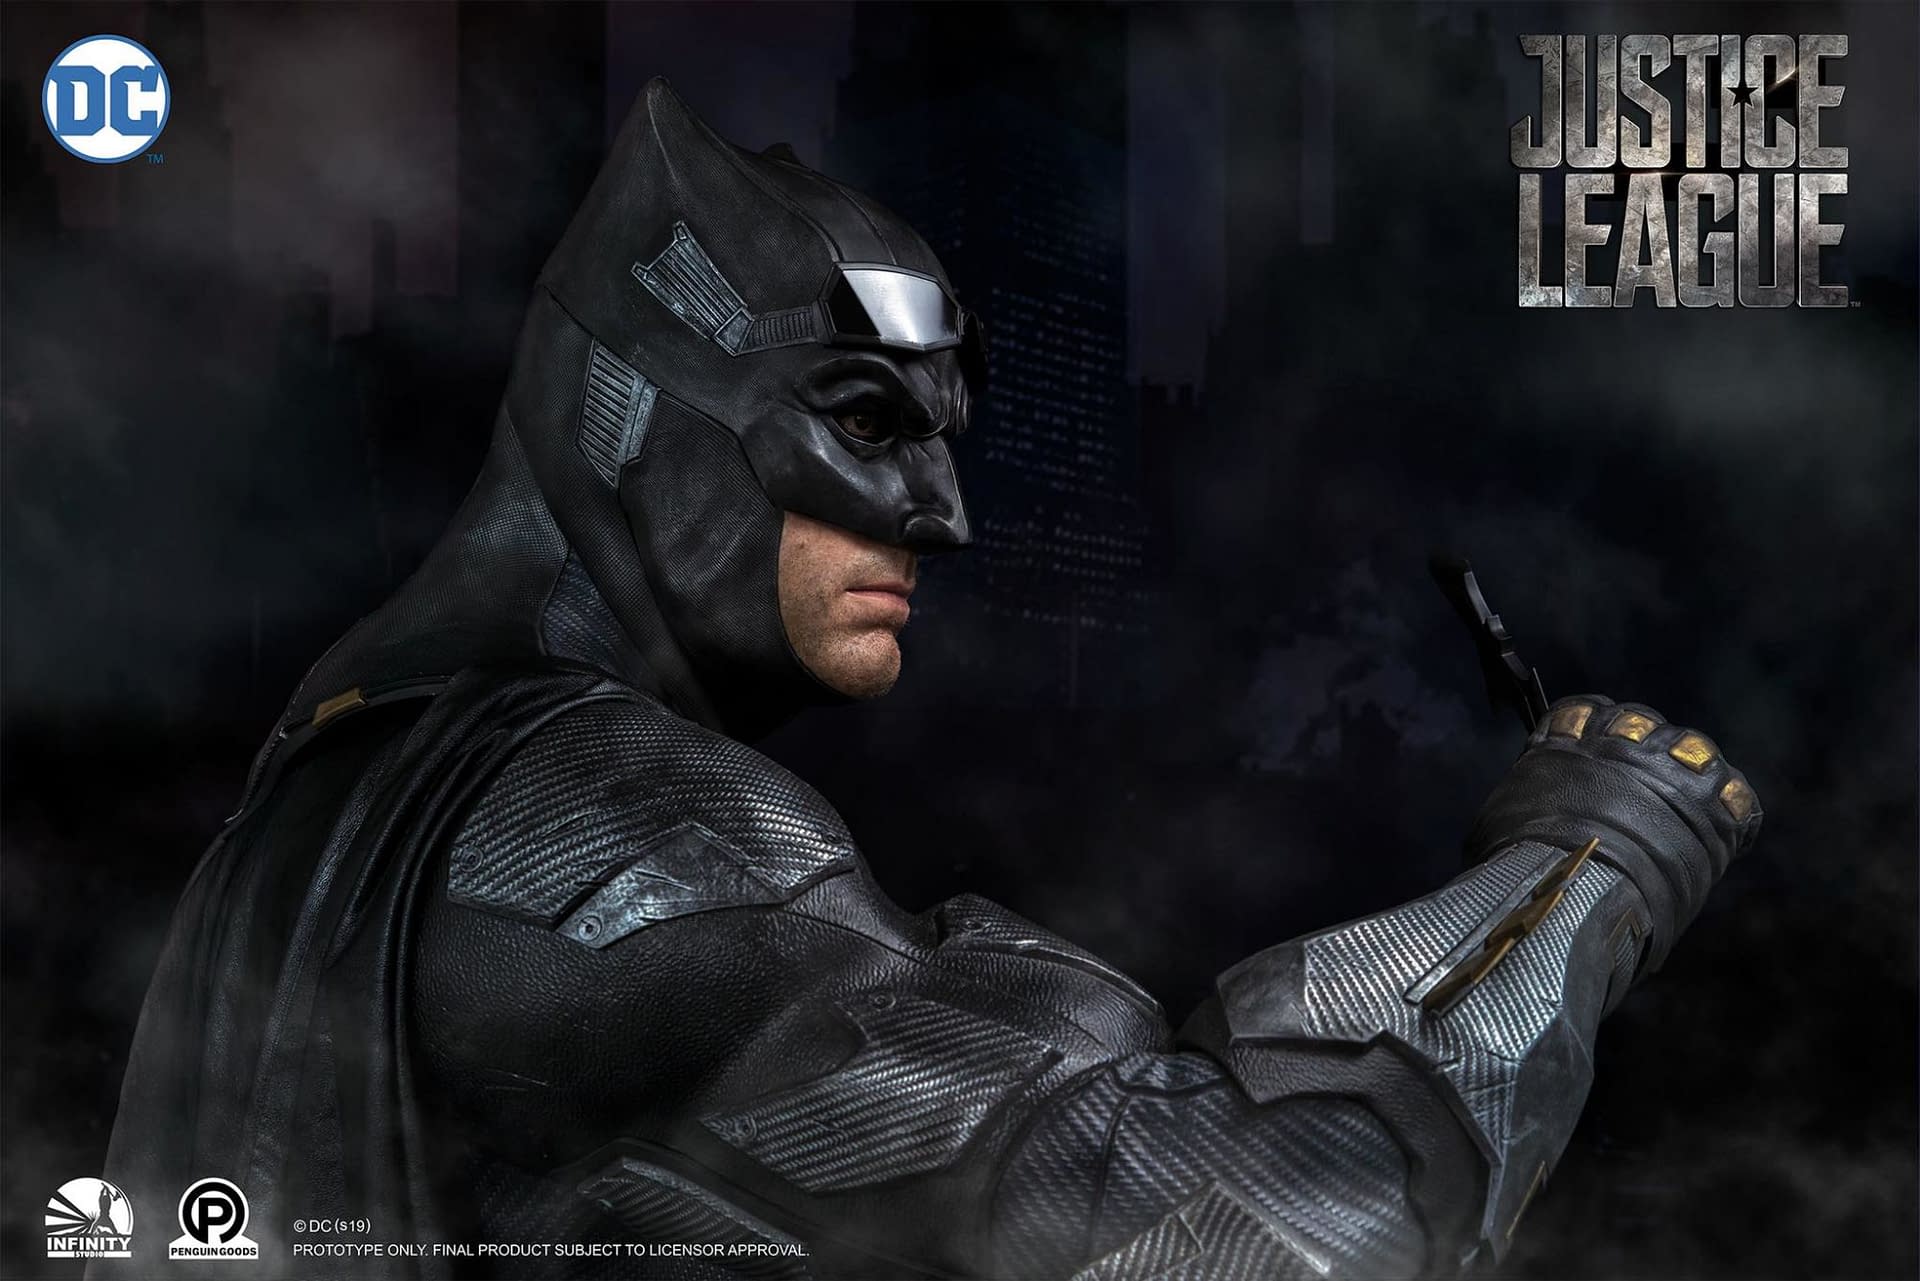 Batman Gets a Life-Size Bust for His Tactical Suit from Infinity Studio